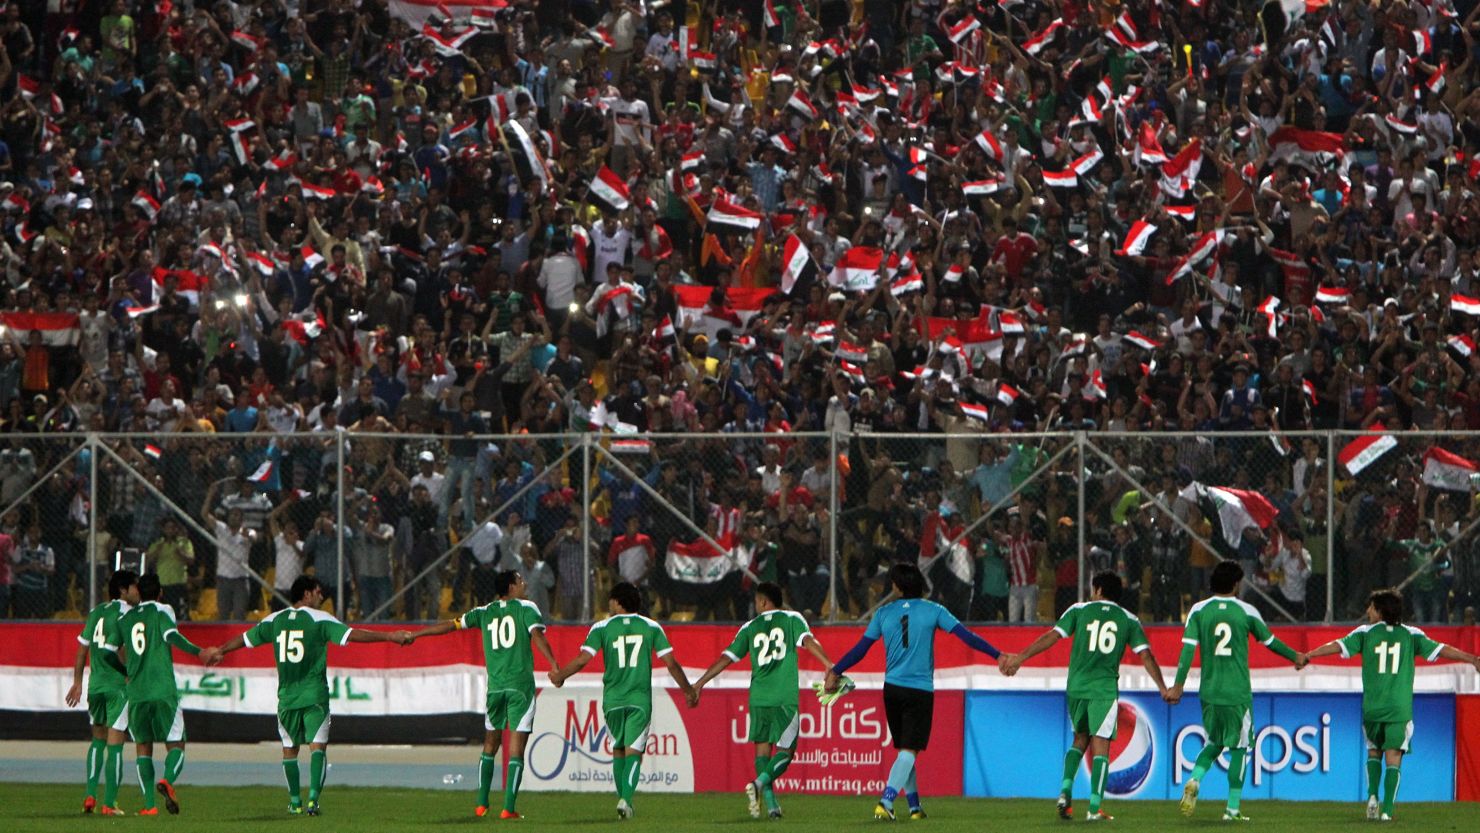 Iraqi team players celebrate after scoring a goal during their friendly soccer match against Syria in Baghdad.